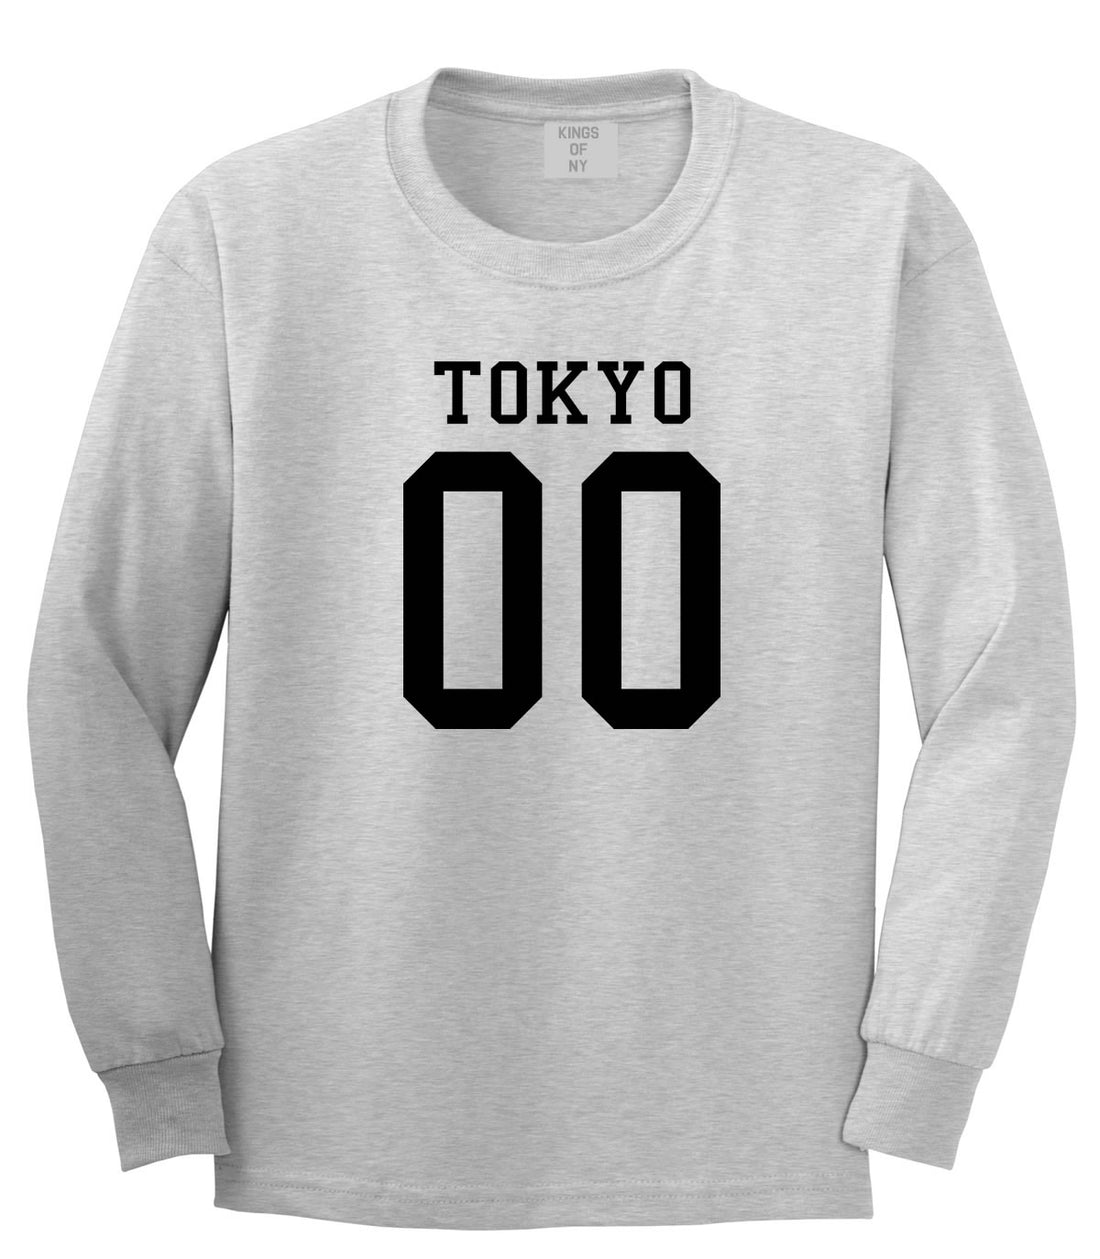 Tokyo Team 00 Jersey Japan Long Sleeve T-Shirt in Grey By Kings Of NY